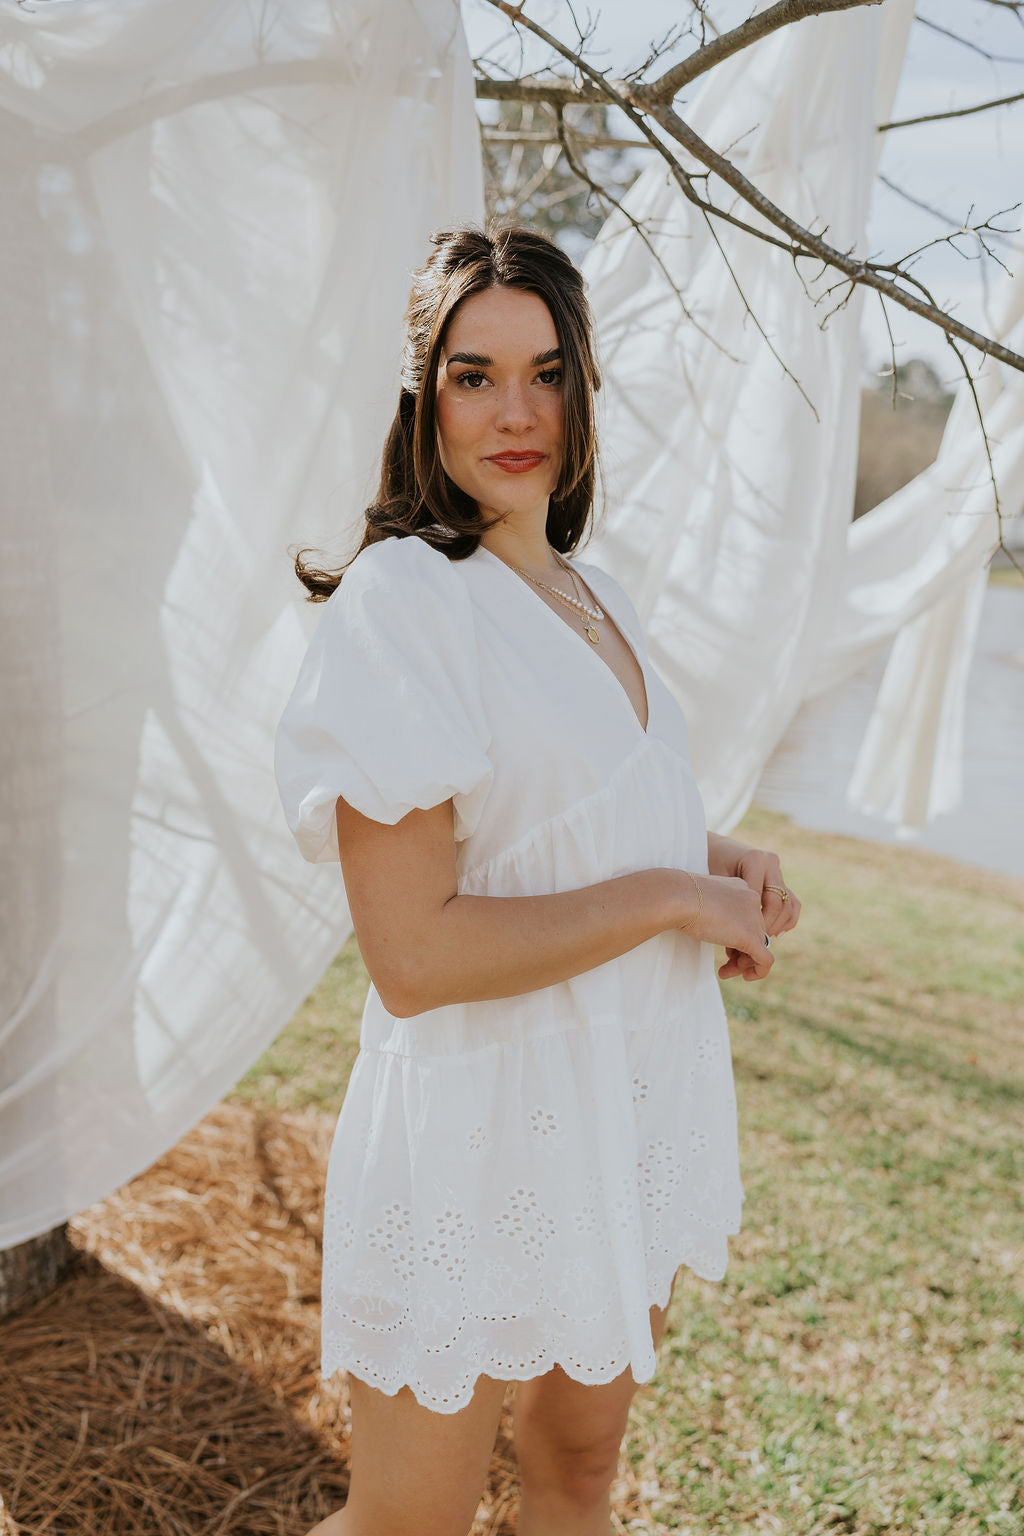 Frontal side view of female model wearing the Madeline White Eyelet Romper that has white fabric with eyelet details, short puff sleeves, a vneck, and a keyhole back with a tie.